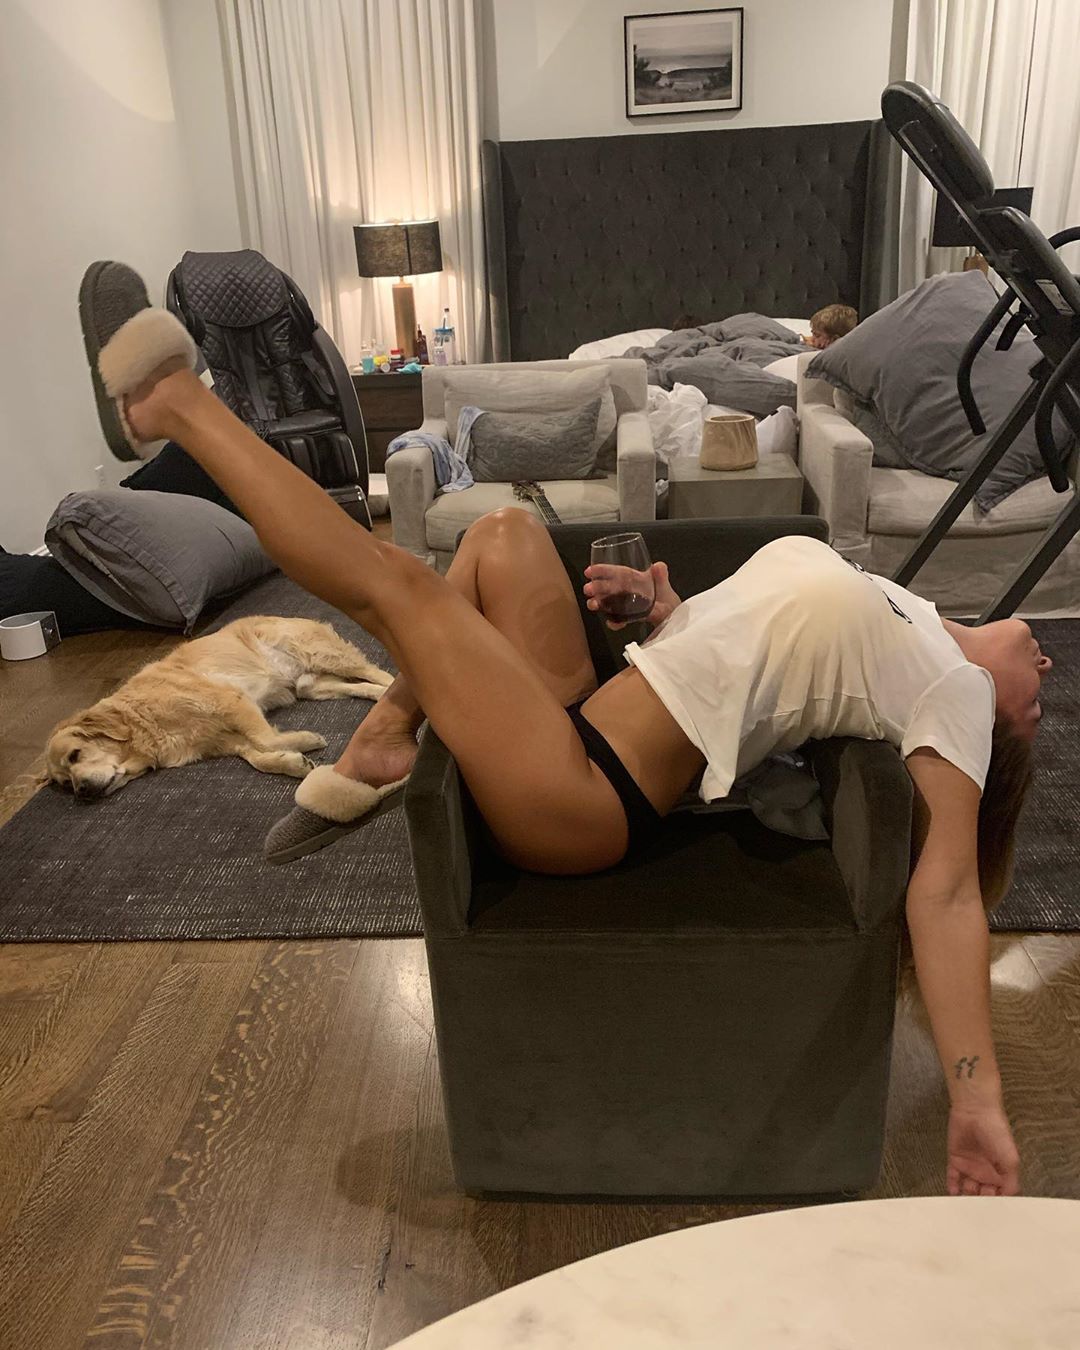 Jessie James Decker Celebrates Having the No. 1 Most Added Song by Jumping on Her Bed in Her Underwe - Photo 4